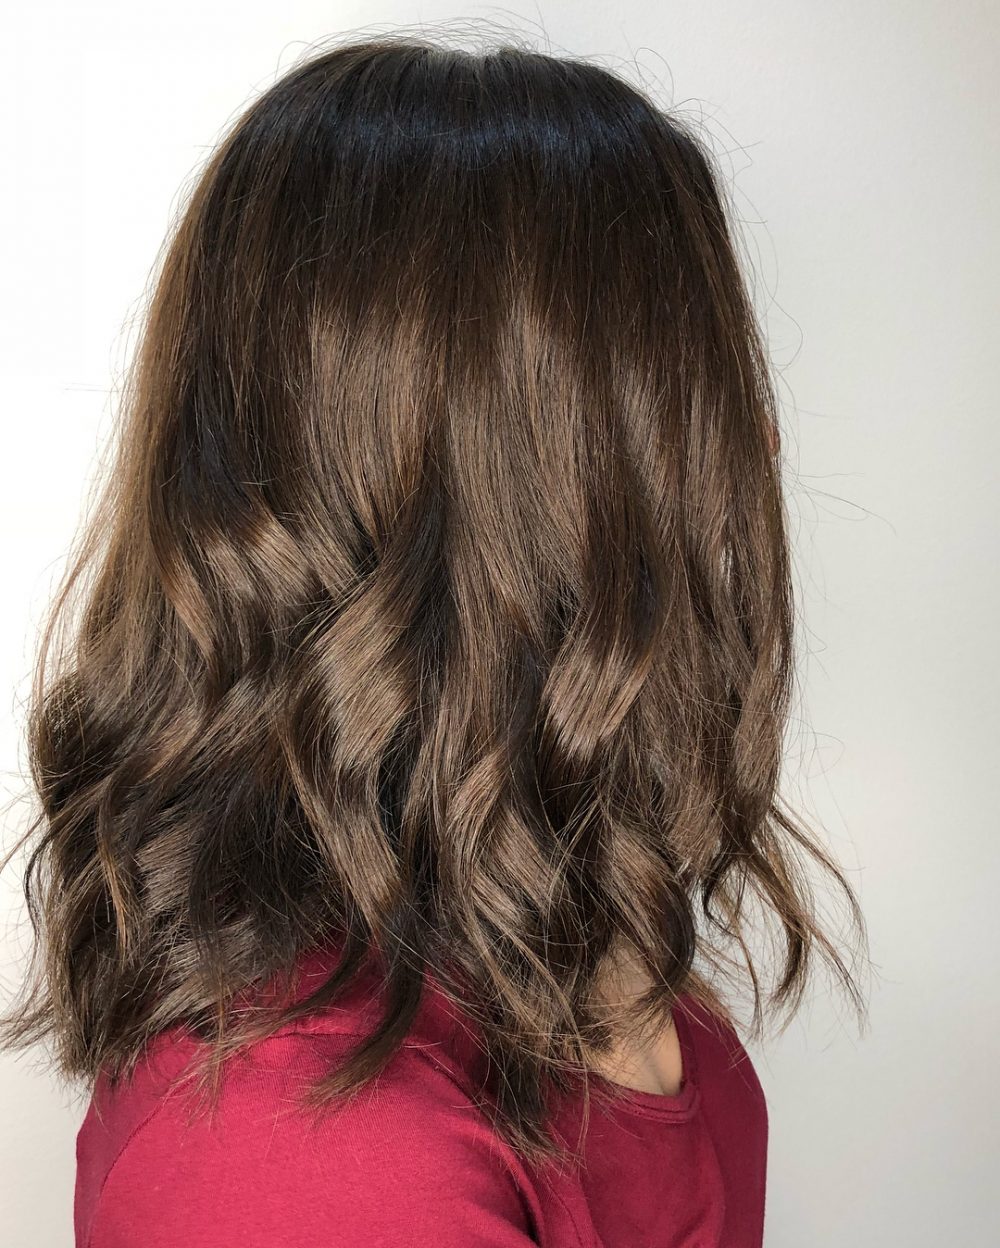 A superb chestnut brown colored bob with textured layers